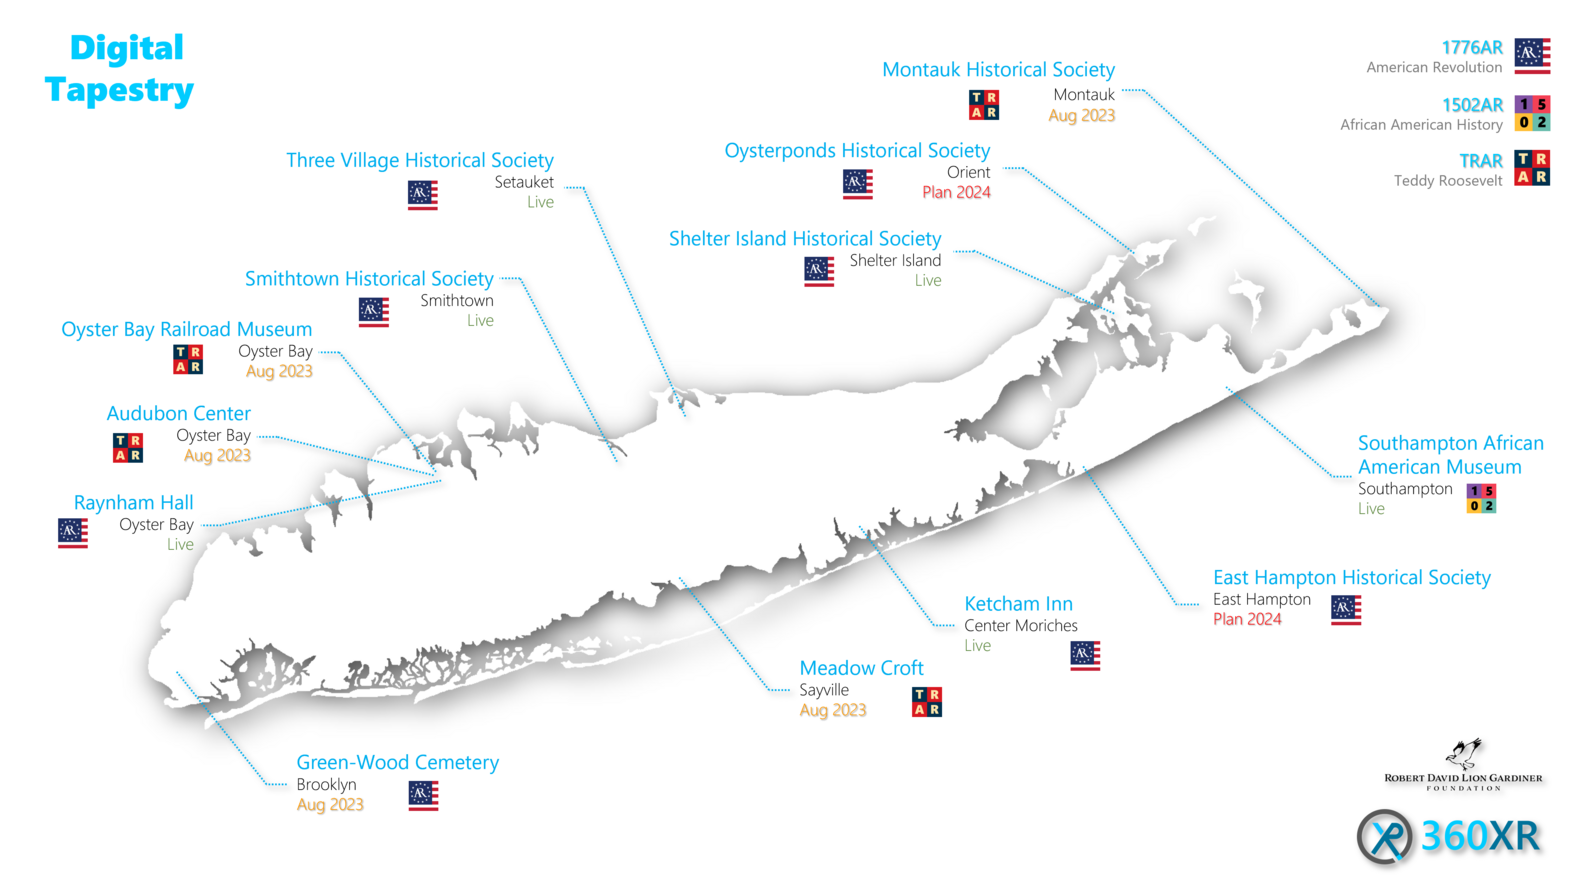 A map of Long Island showing the 11 Digital Tapestry sites.